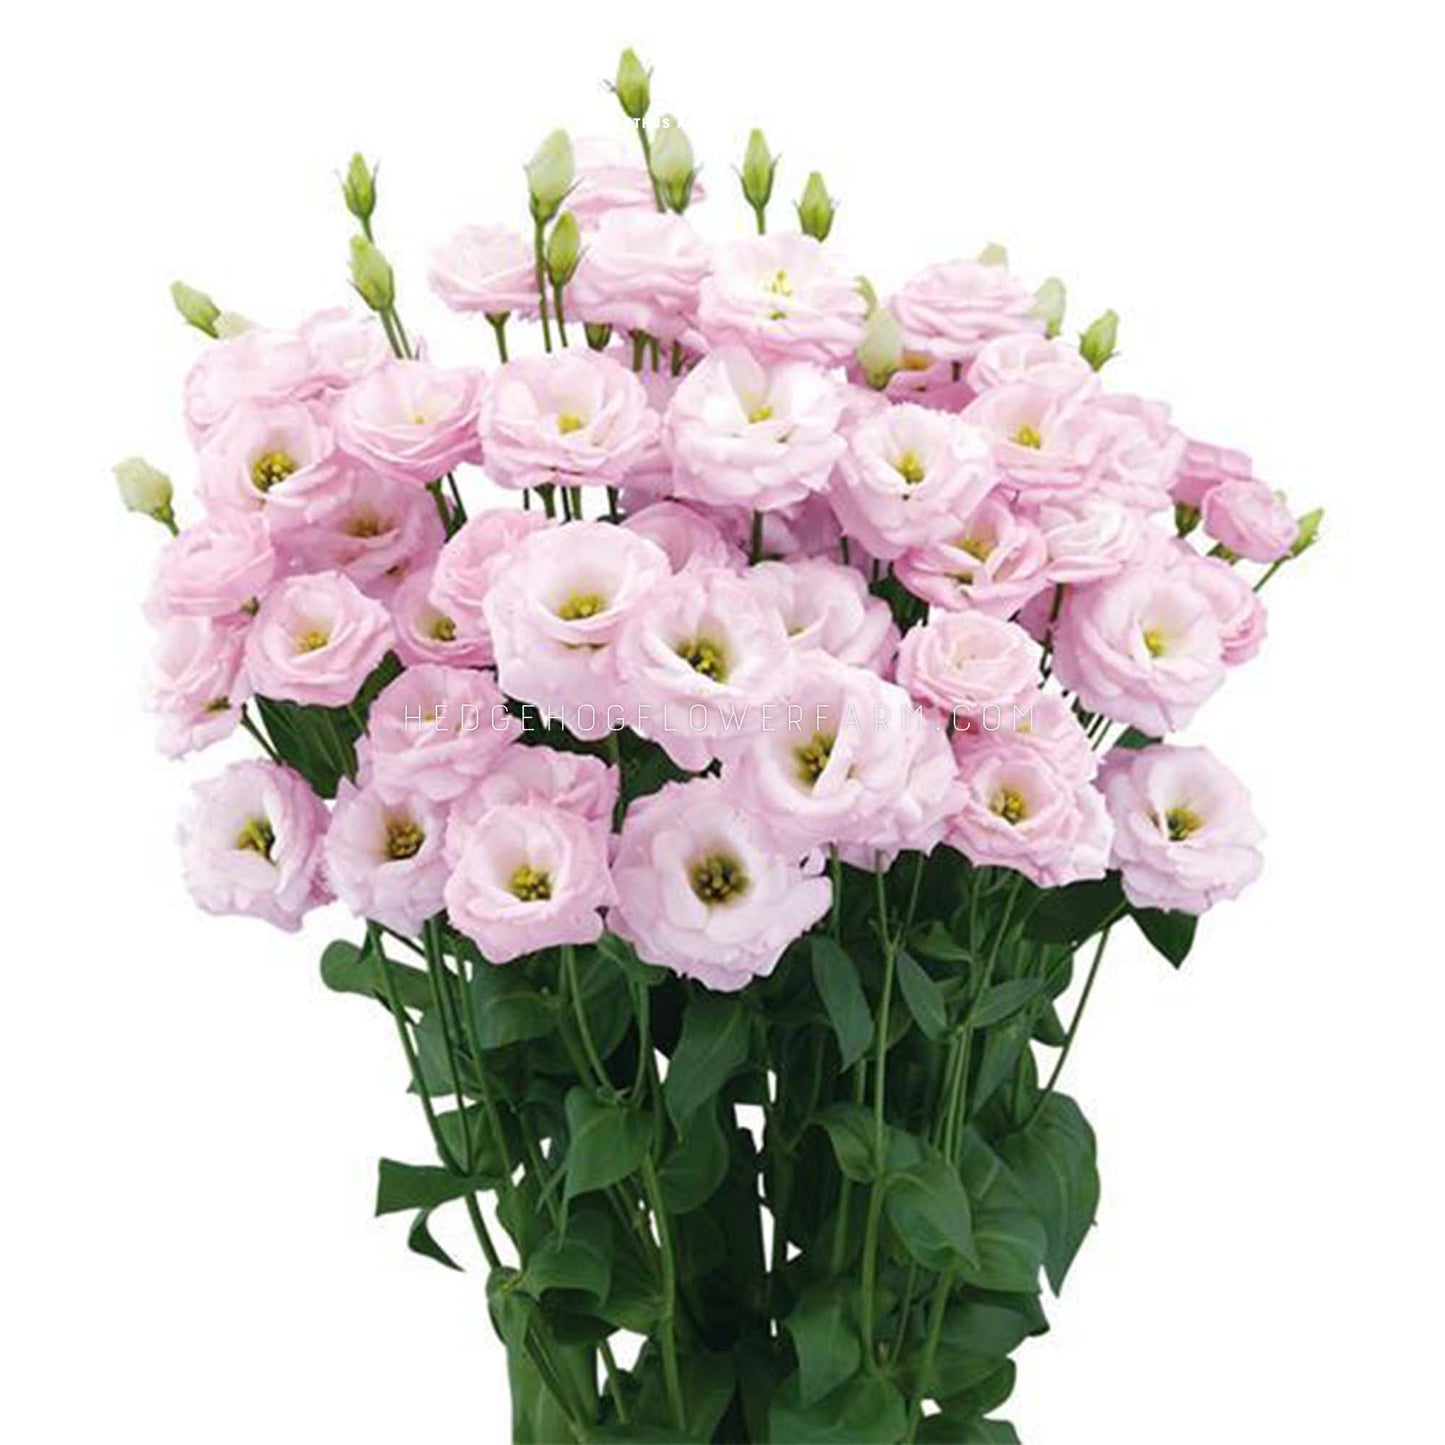 Arosa 1 Pink Lisianthus Seeds for sale from Hedgehog Flower Farm